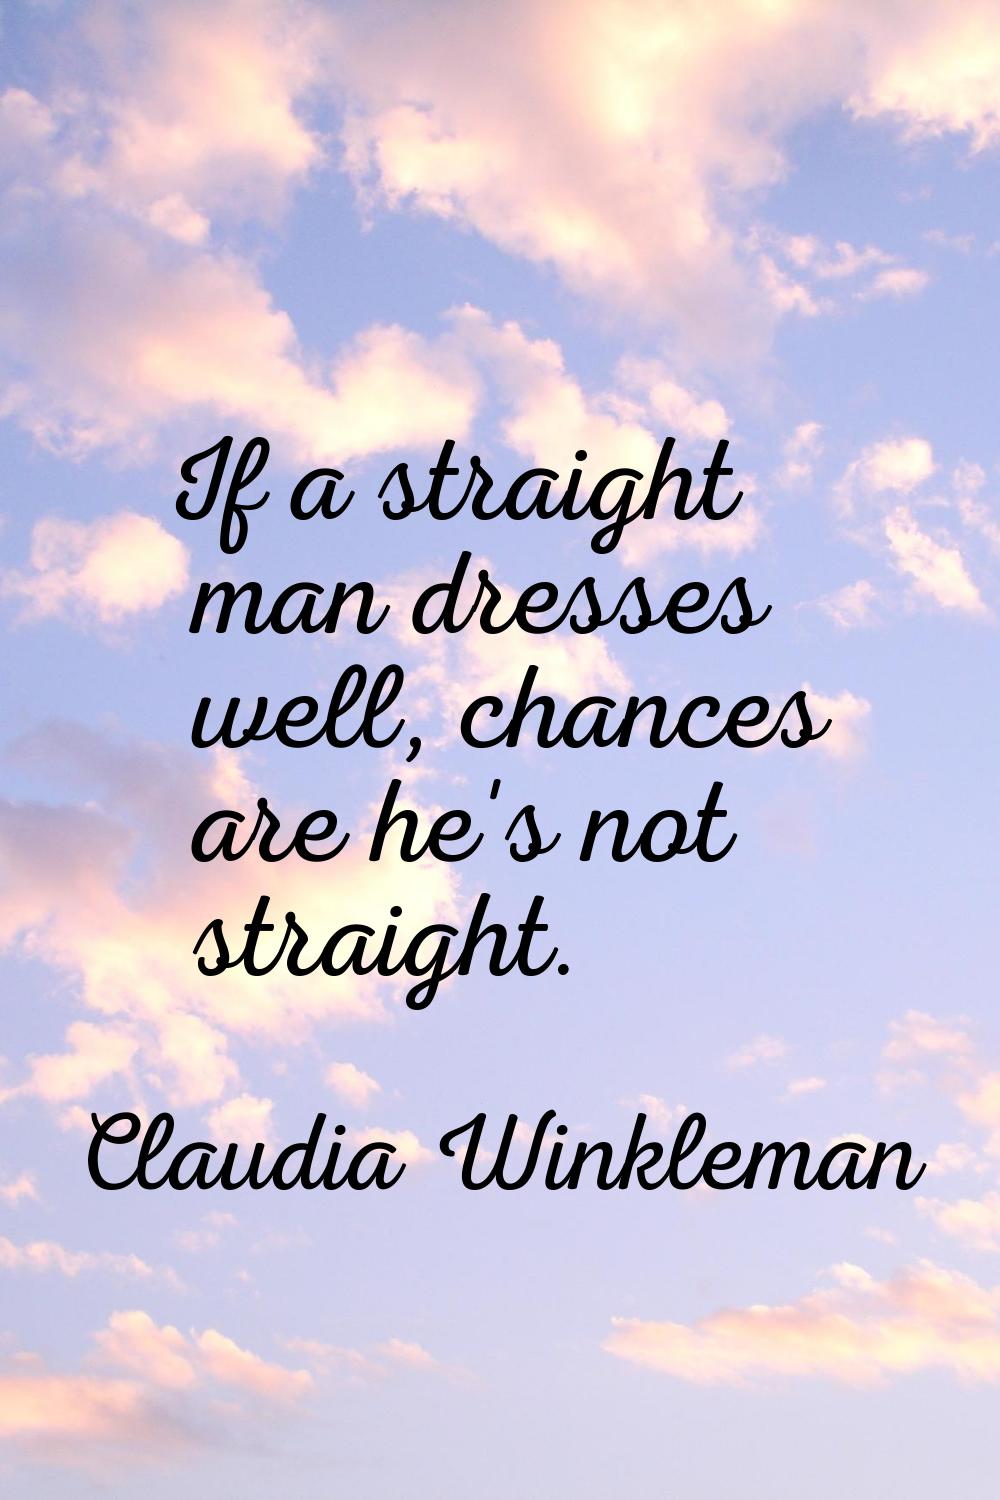 If a straight man dresses well, chances are he's not straight.